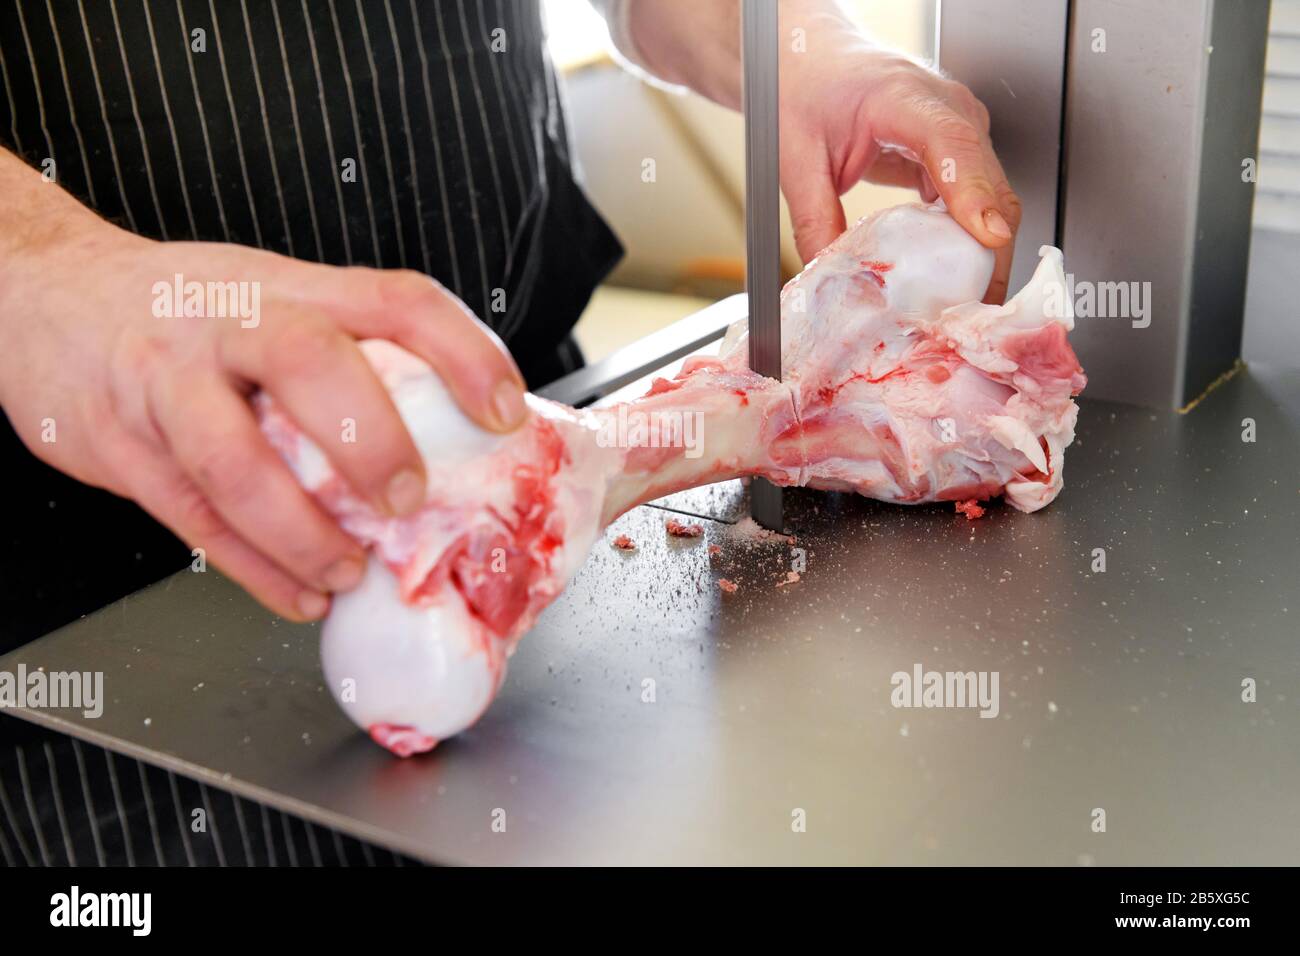 Butcher slicing a fresh trimmed raw calf femur on a band saw to make marrow bones in a close up on his hands Stock Photo